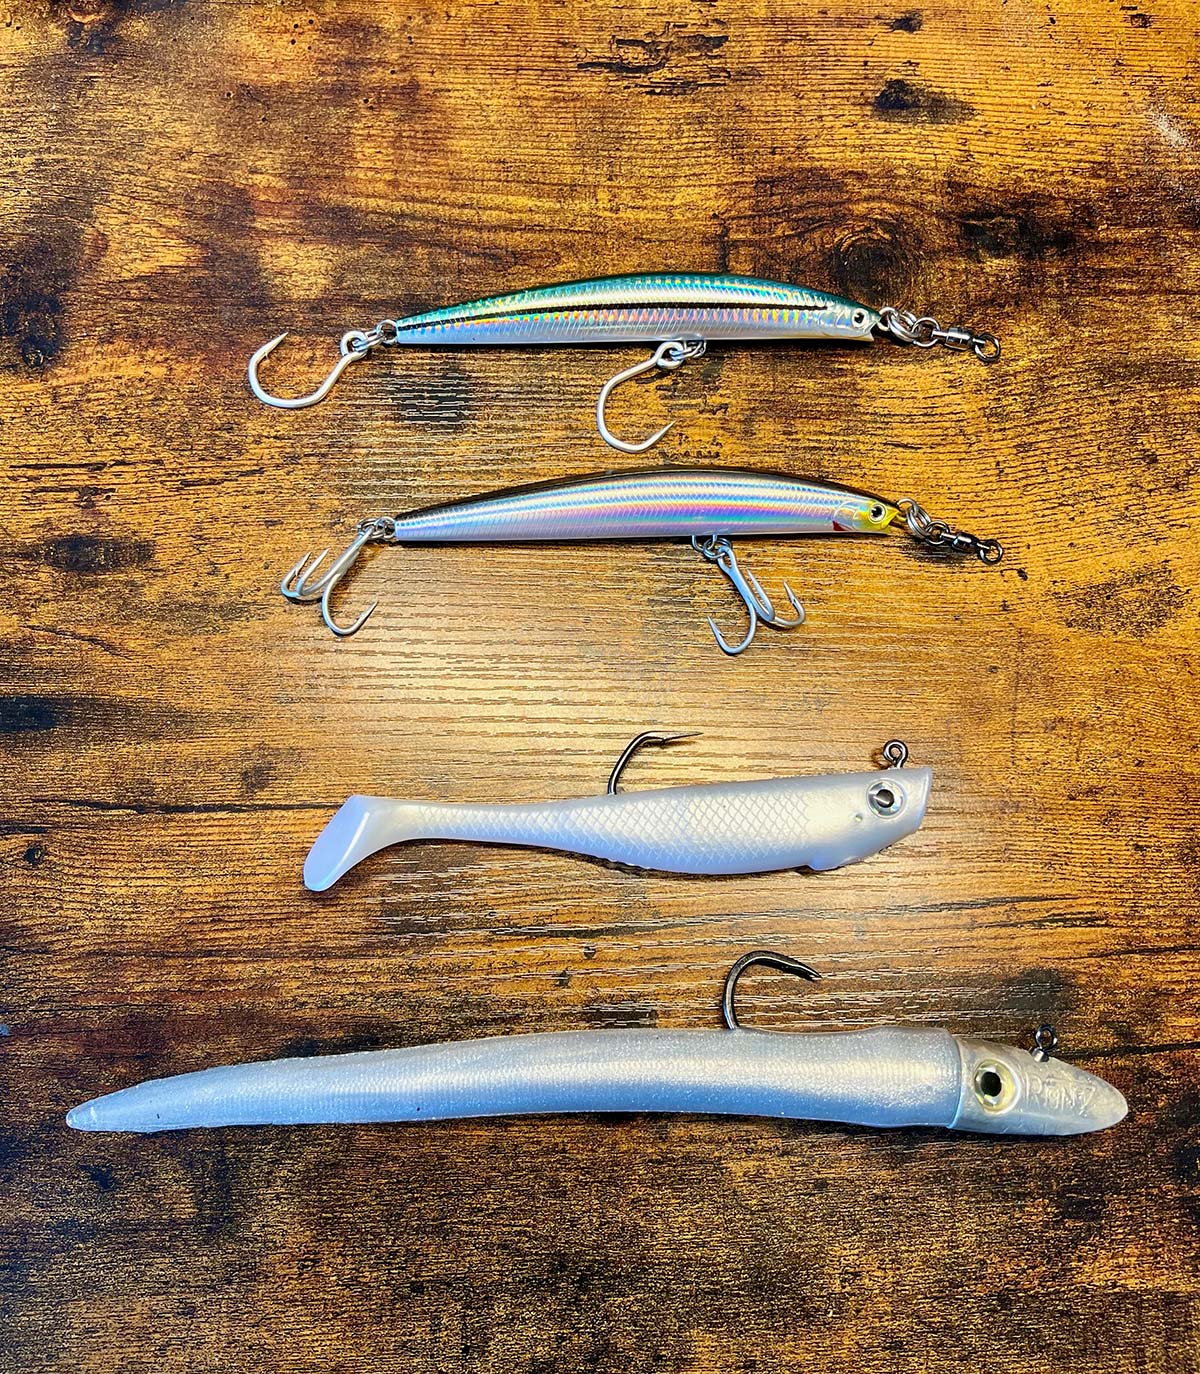 mighty bite lures intial review will give another review after I fish it 